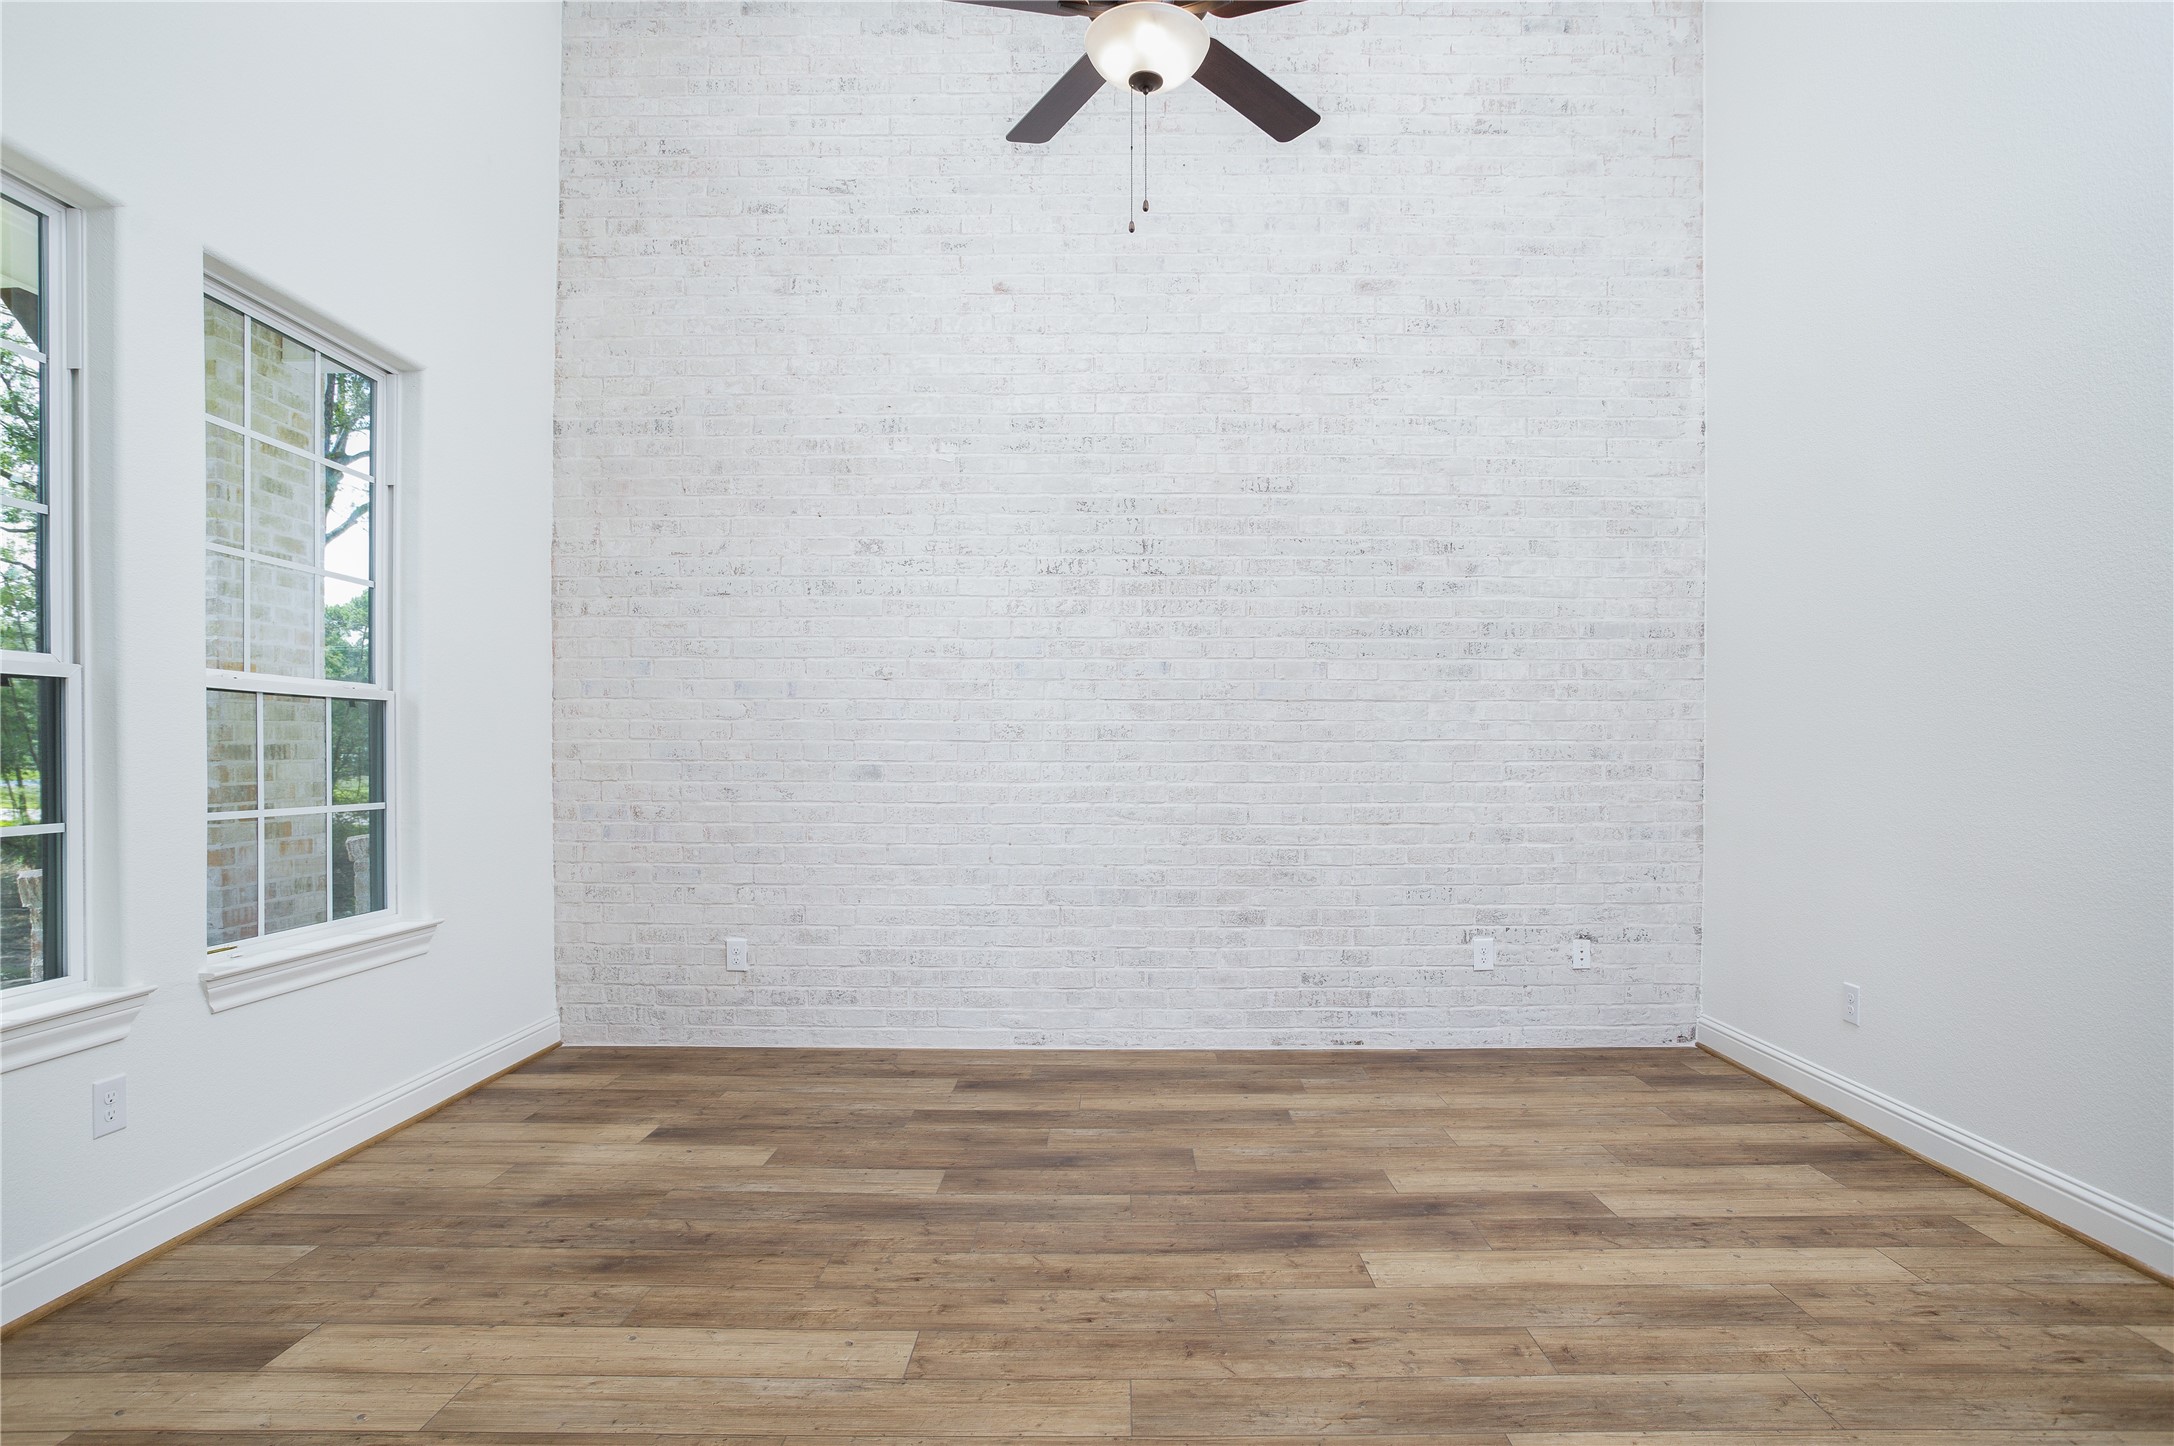 This room up front is perfect for home office/study.  Amazing floor to ceiling brick accent wall. HIGH ceiling.